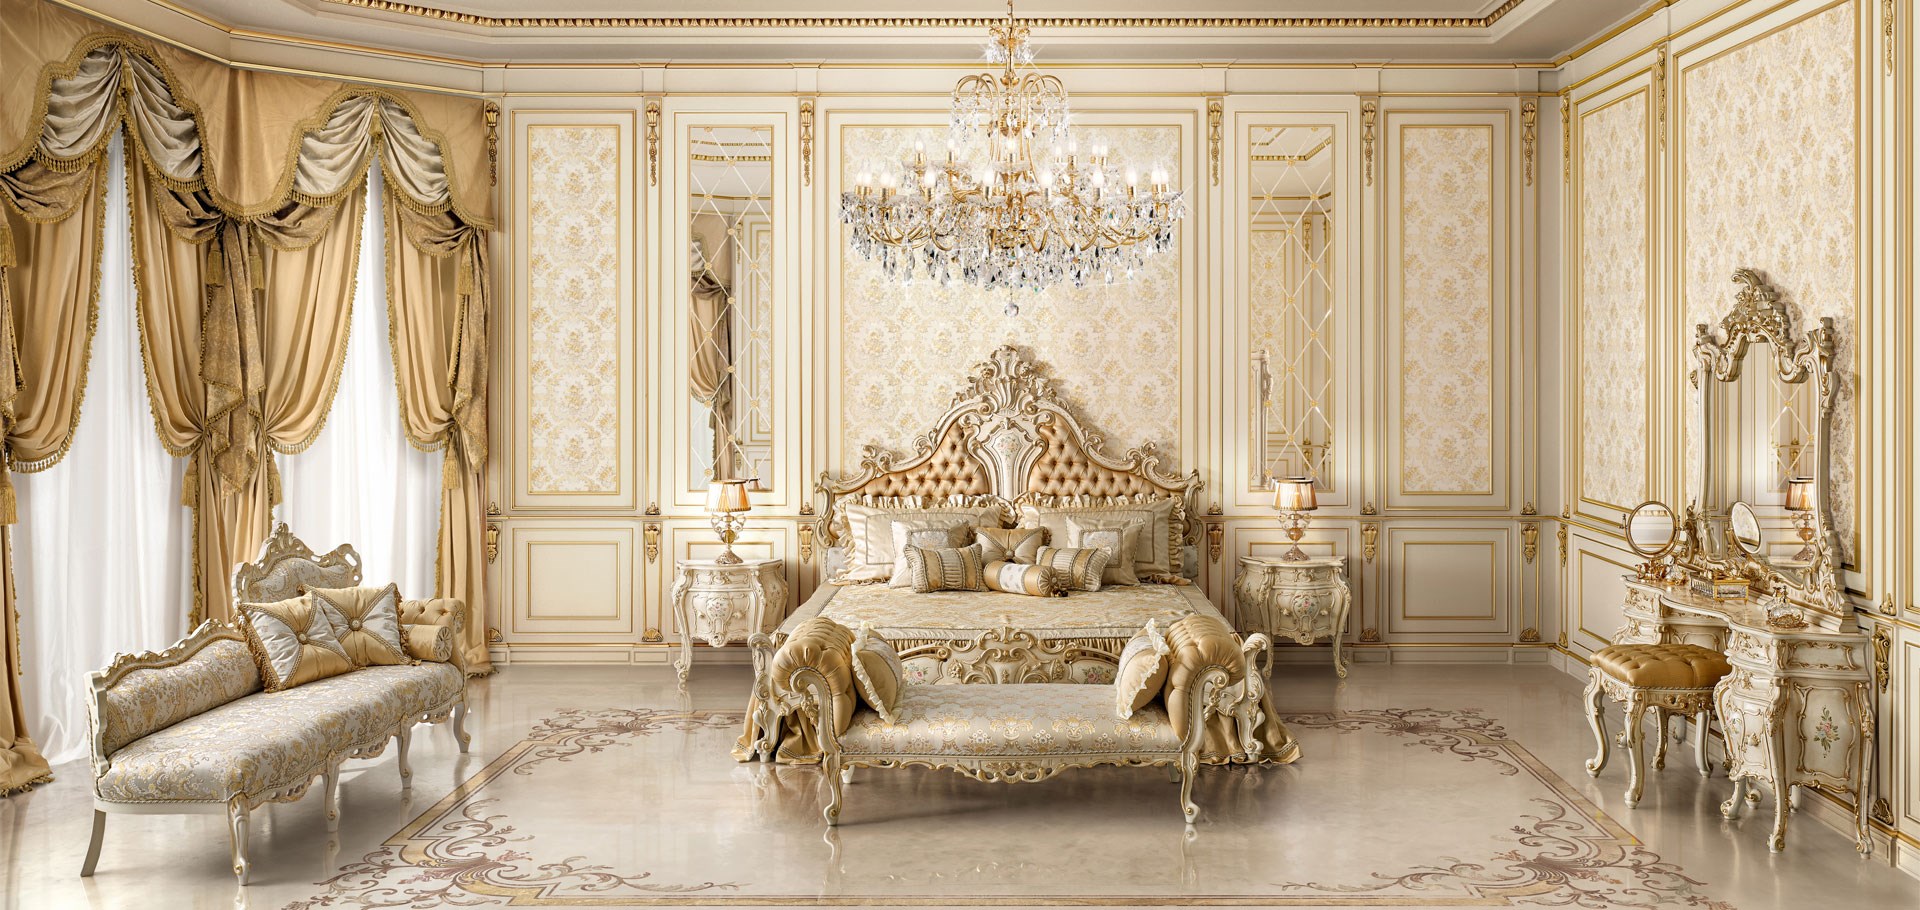 Ivory bedroom classical elegant style luxury home fit out